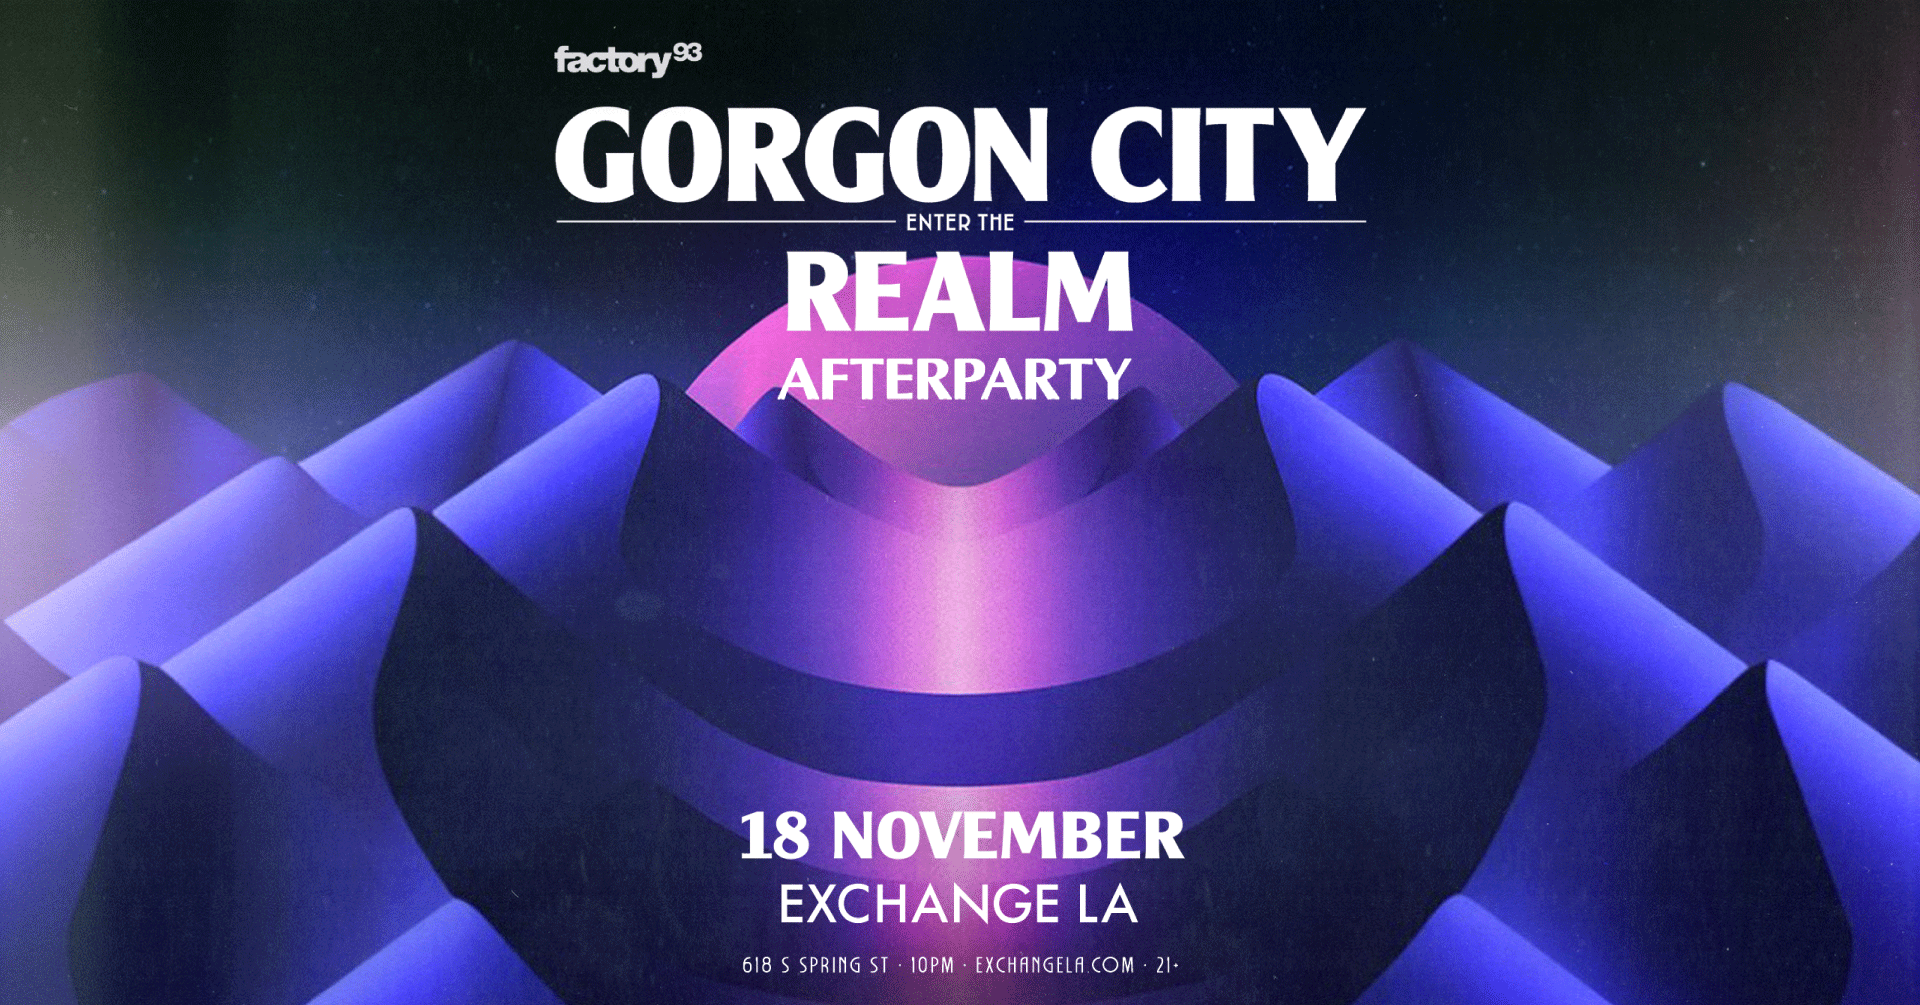 Factory 93: Gorgon City - Enter the Realm Afterparty - Página frontal